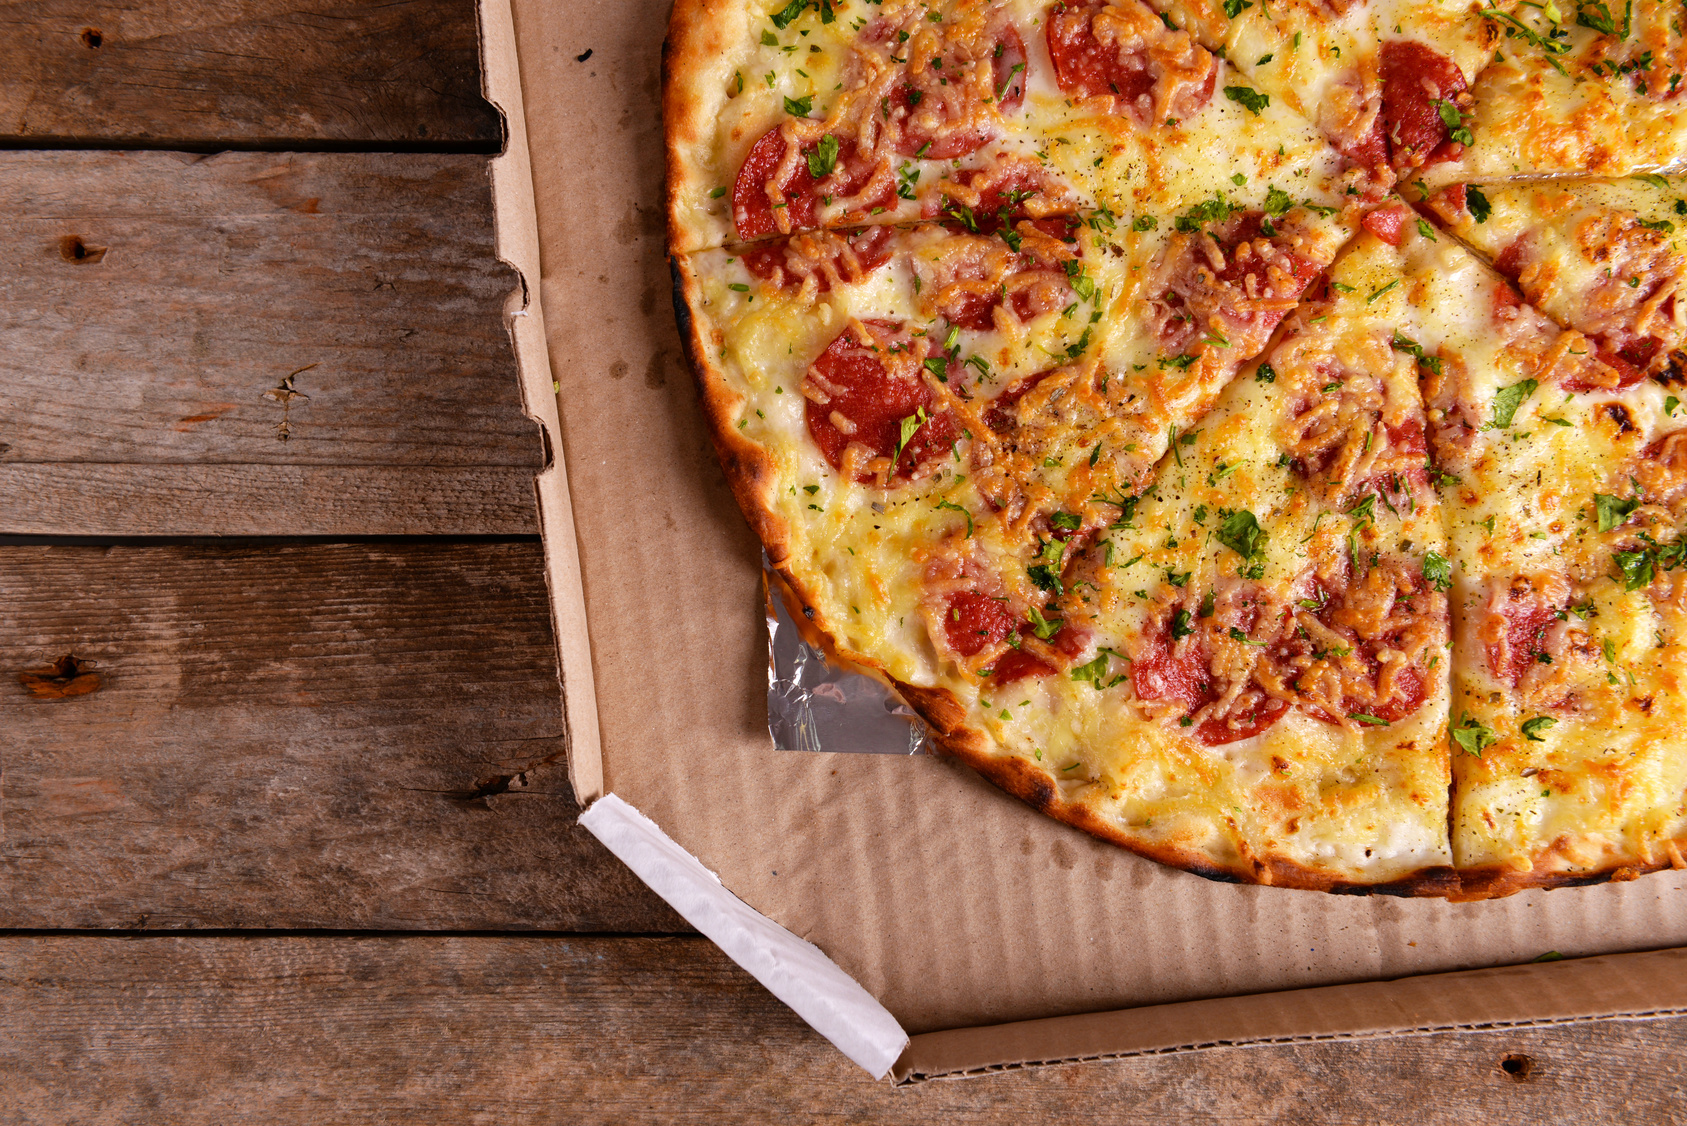 Tasty pizza in box on wooden background